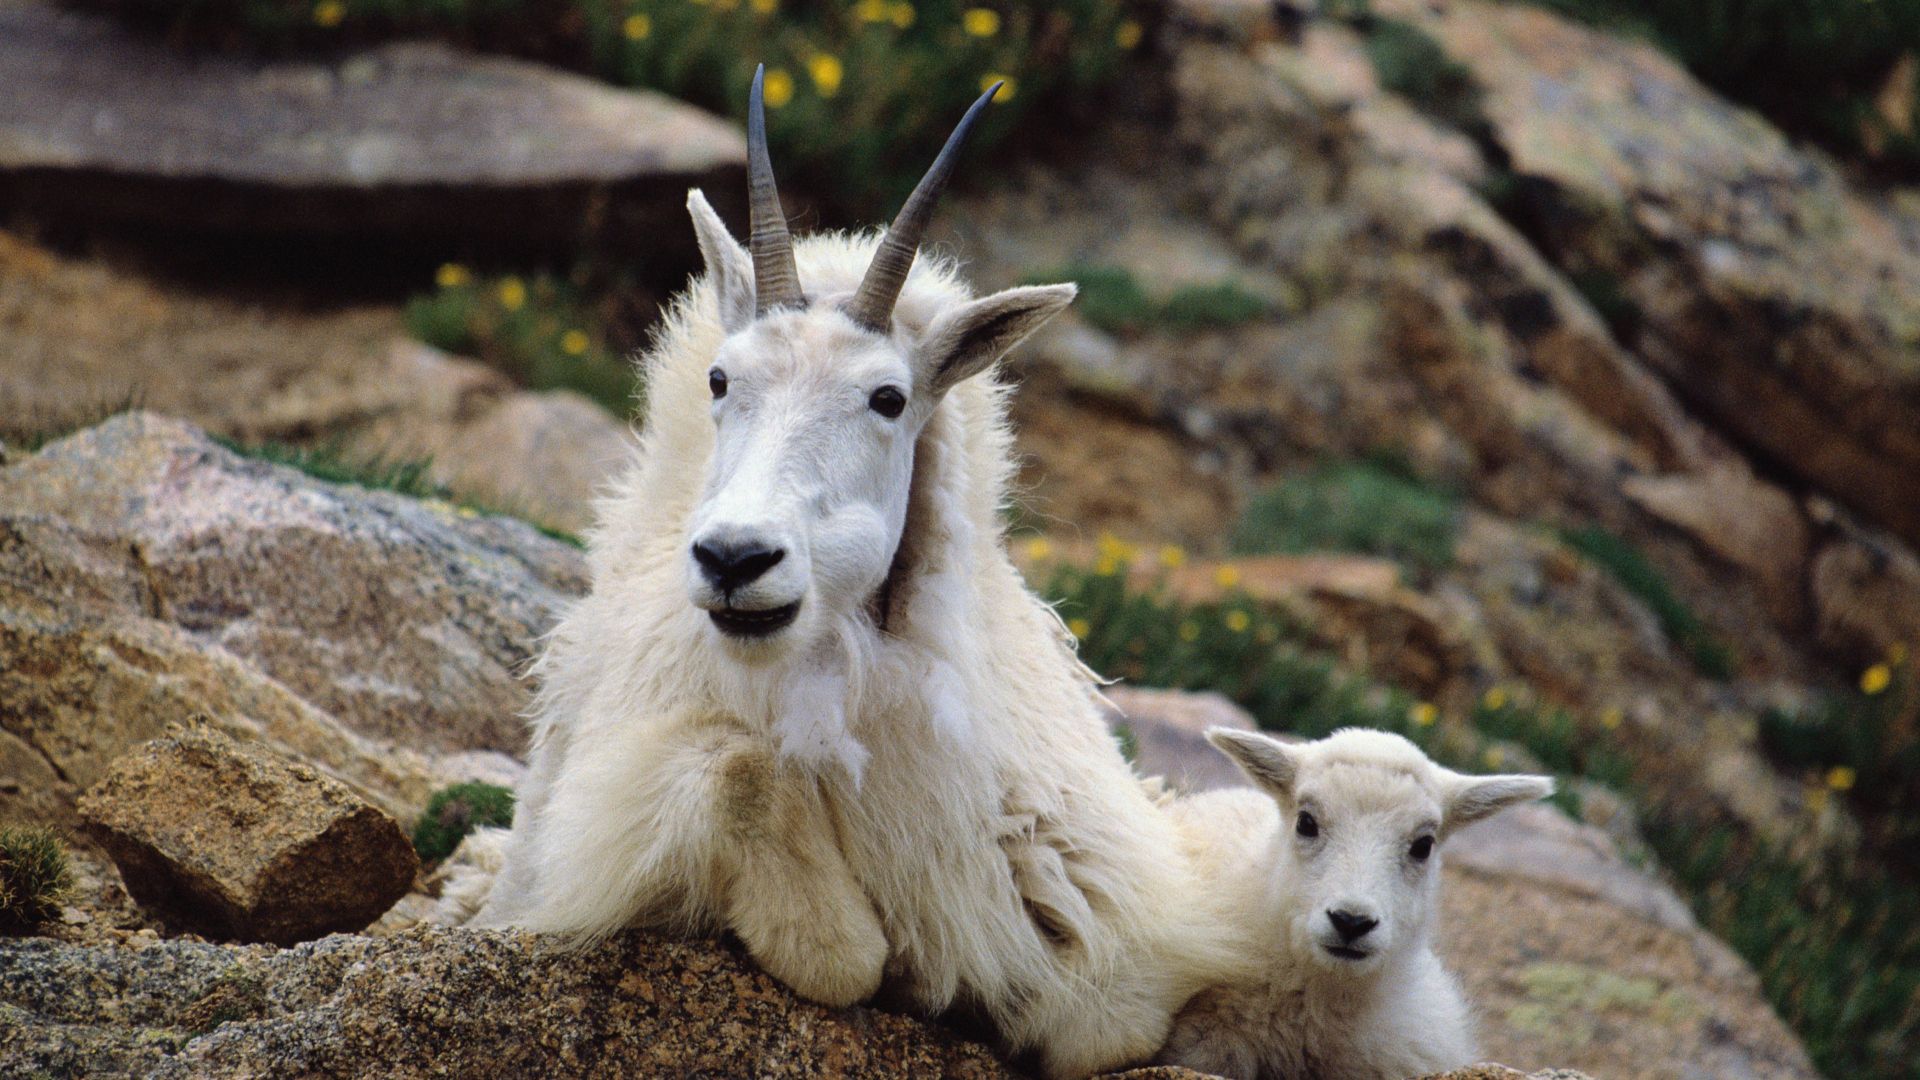 <p>                     Mountain goats aren’t native to the area, but there are now believed to be up to 300 of them here. Despite their name, mountain goats are not actually goats at all. Rather, they are in the same cloven-hoofed family that comprises animals like gazelles, antelopes and bison. In appearance, however, they do very much resemble goats, albeit ones with long, shaggy white hair. These beautiful creatures sport curved black horns and if you’re lucky, you might see one at higher elevations in northeastern and northwestern portions of the park.                    </p>